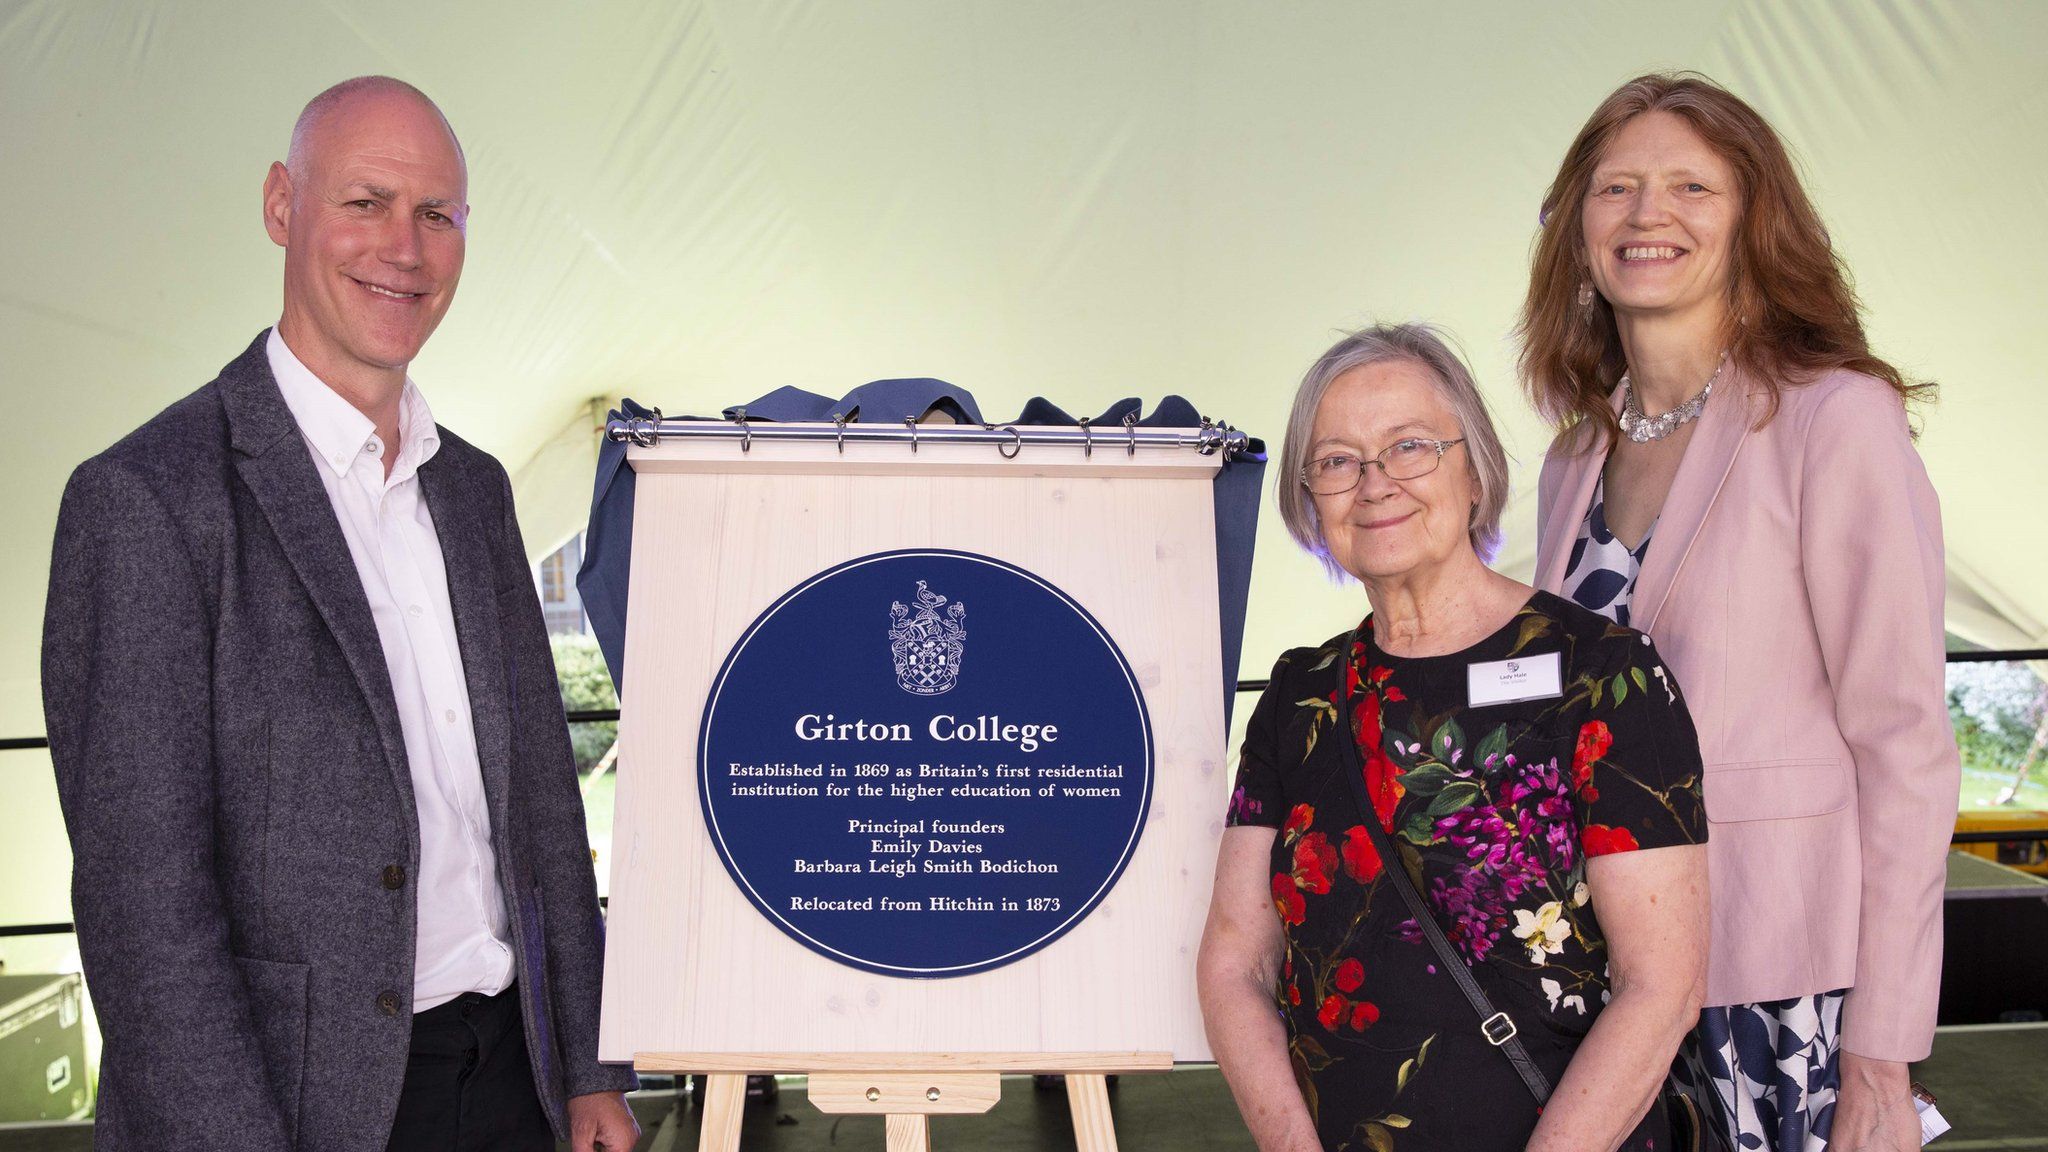 The plaque was unveiled as part of a weekend celebrating the 150th anniversary of Girton College.